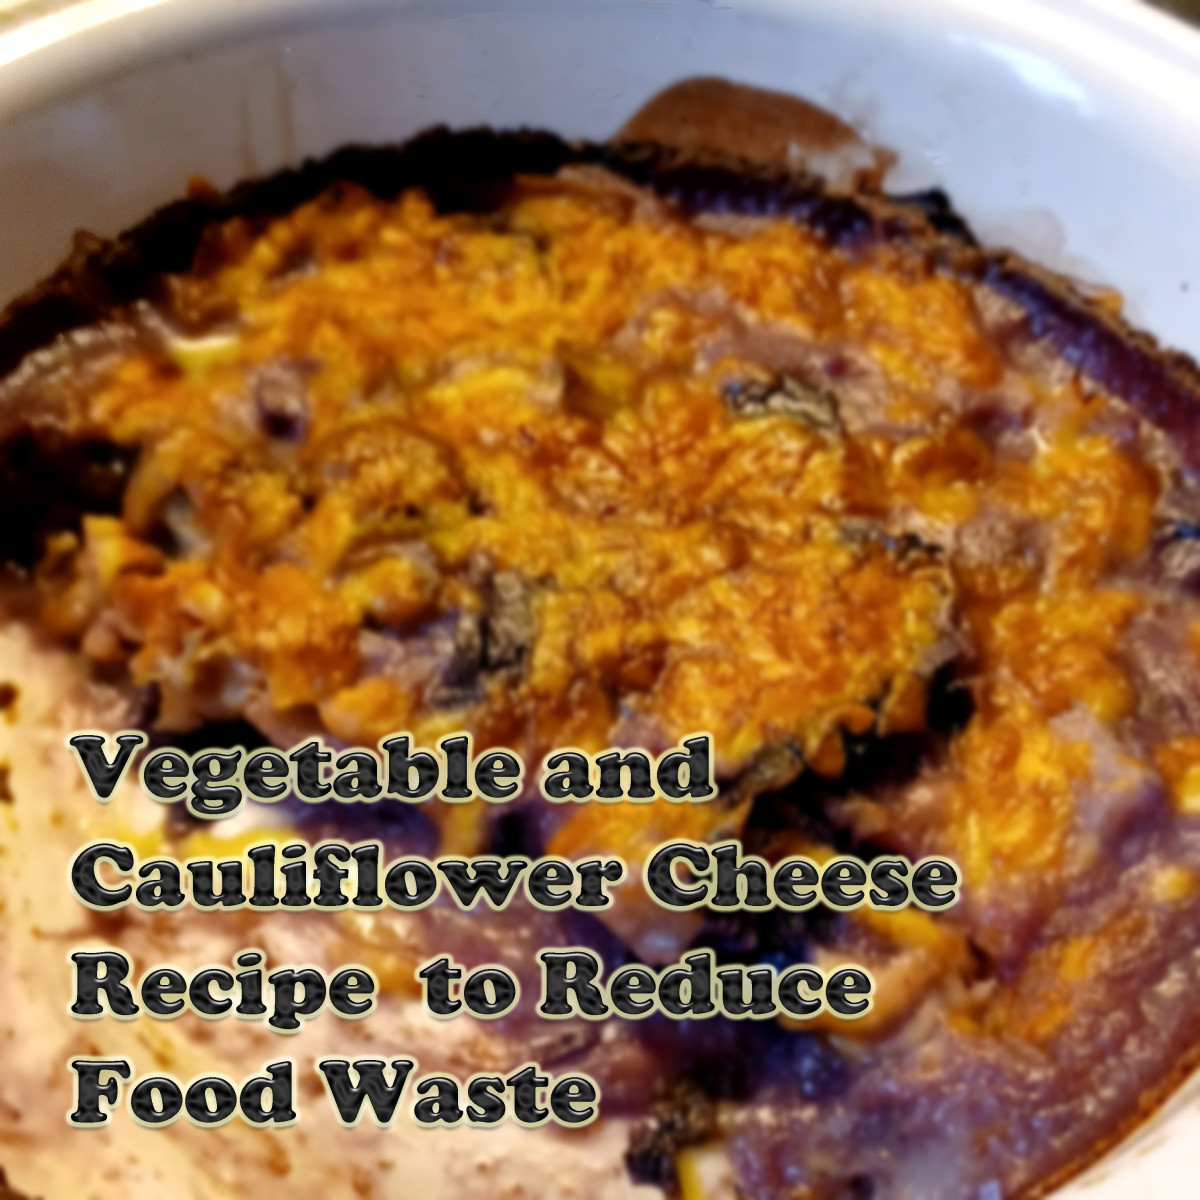 Vegetable and Cauliflower Cheese Recipe to Reduce Food Waste